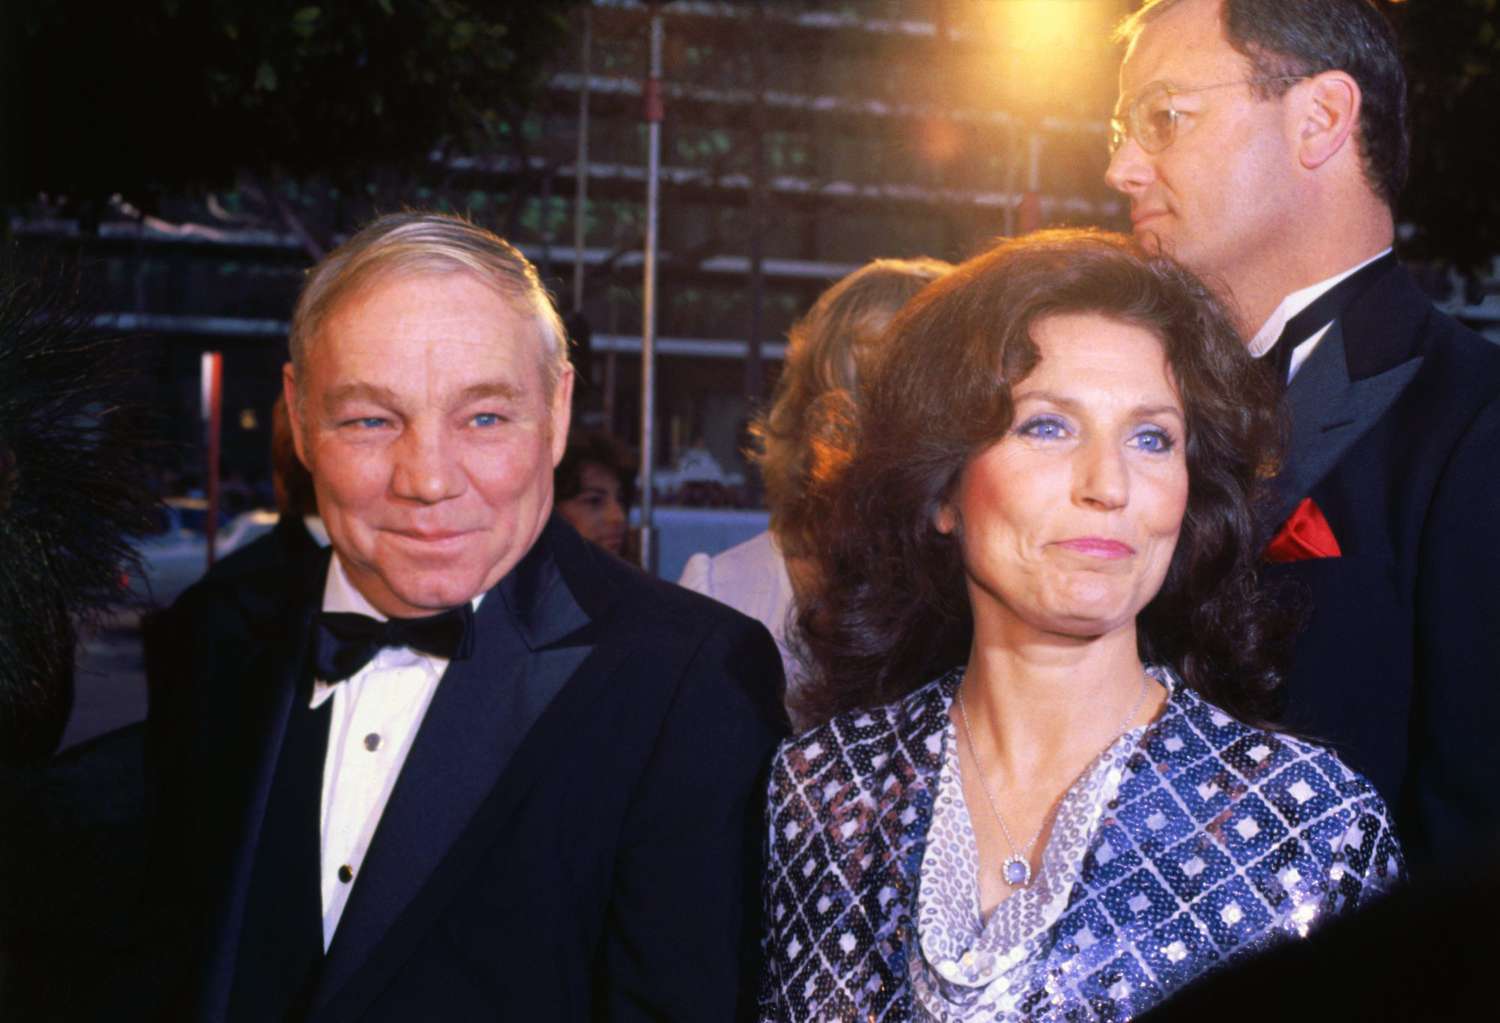 Country music singer Loretta Lynn is pictured here with her husband, Oliver "Doolittle" Lynn in 1981 at the Academy Awards